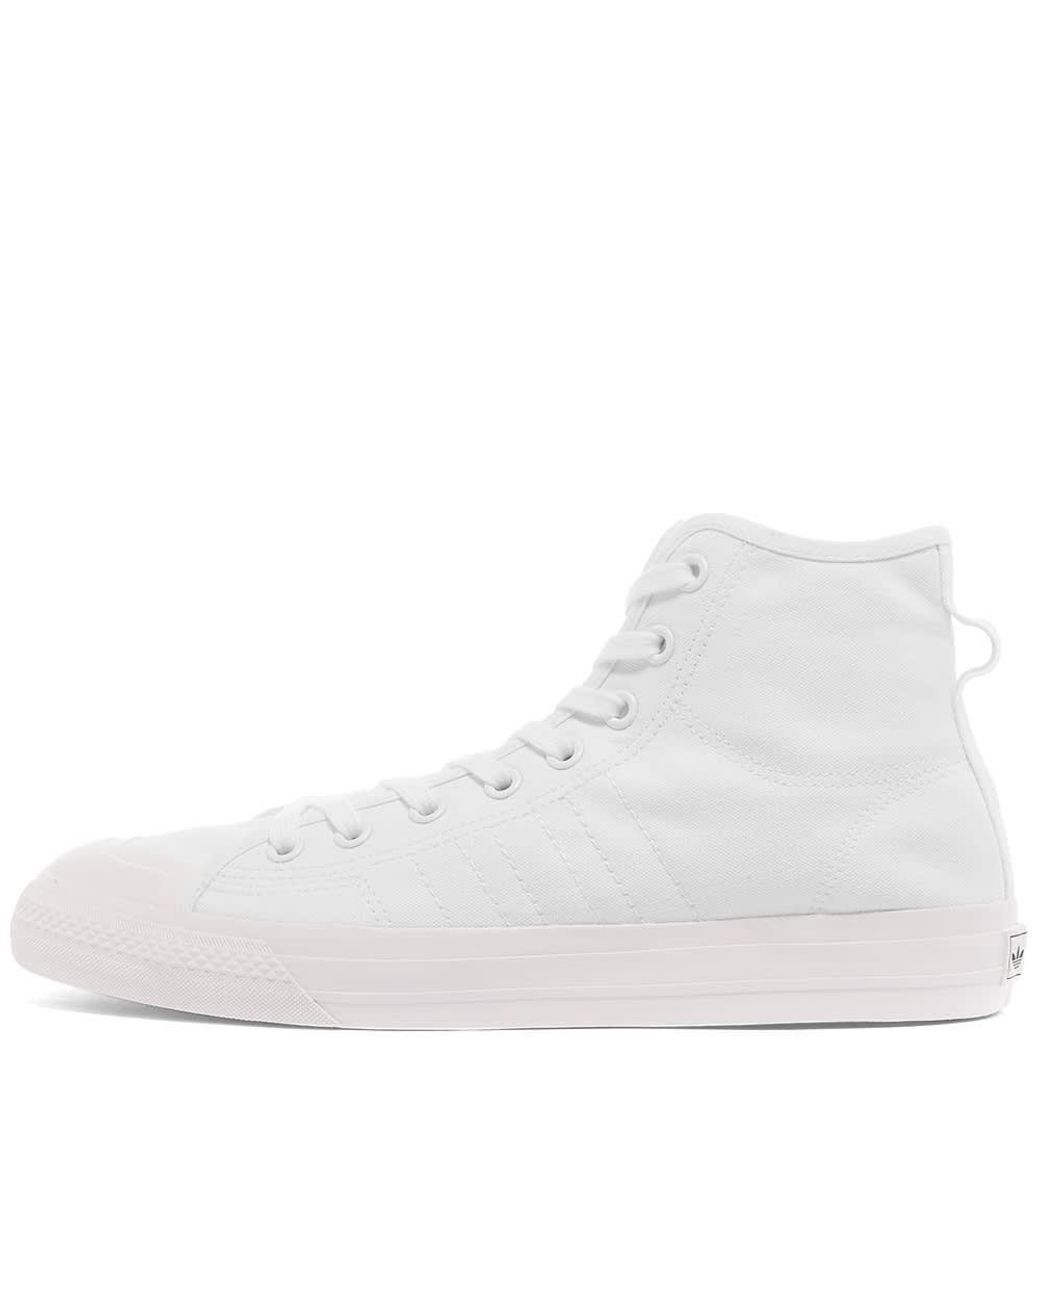 adidas Nizza Rf for | Trainers White in Lyst Hi Men Top